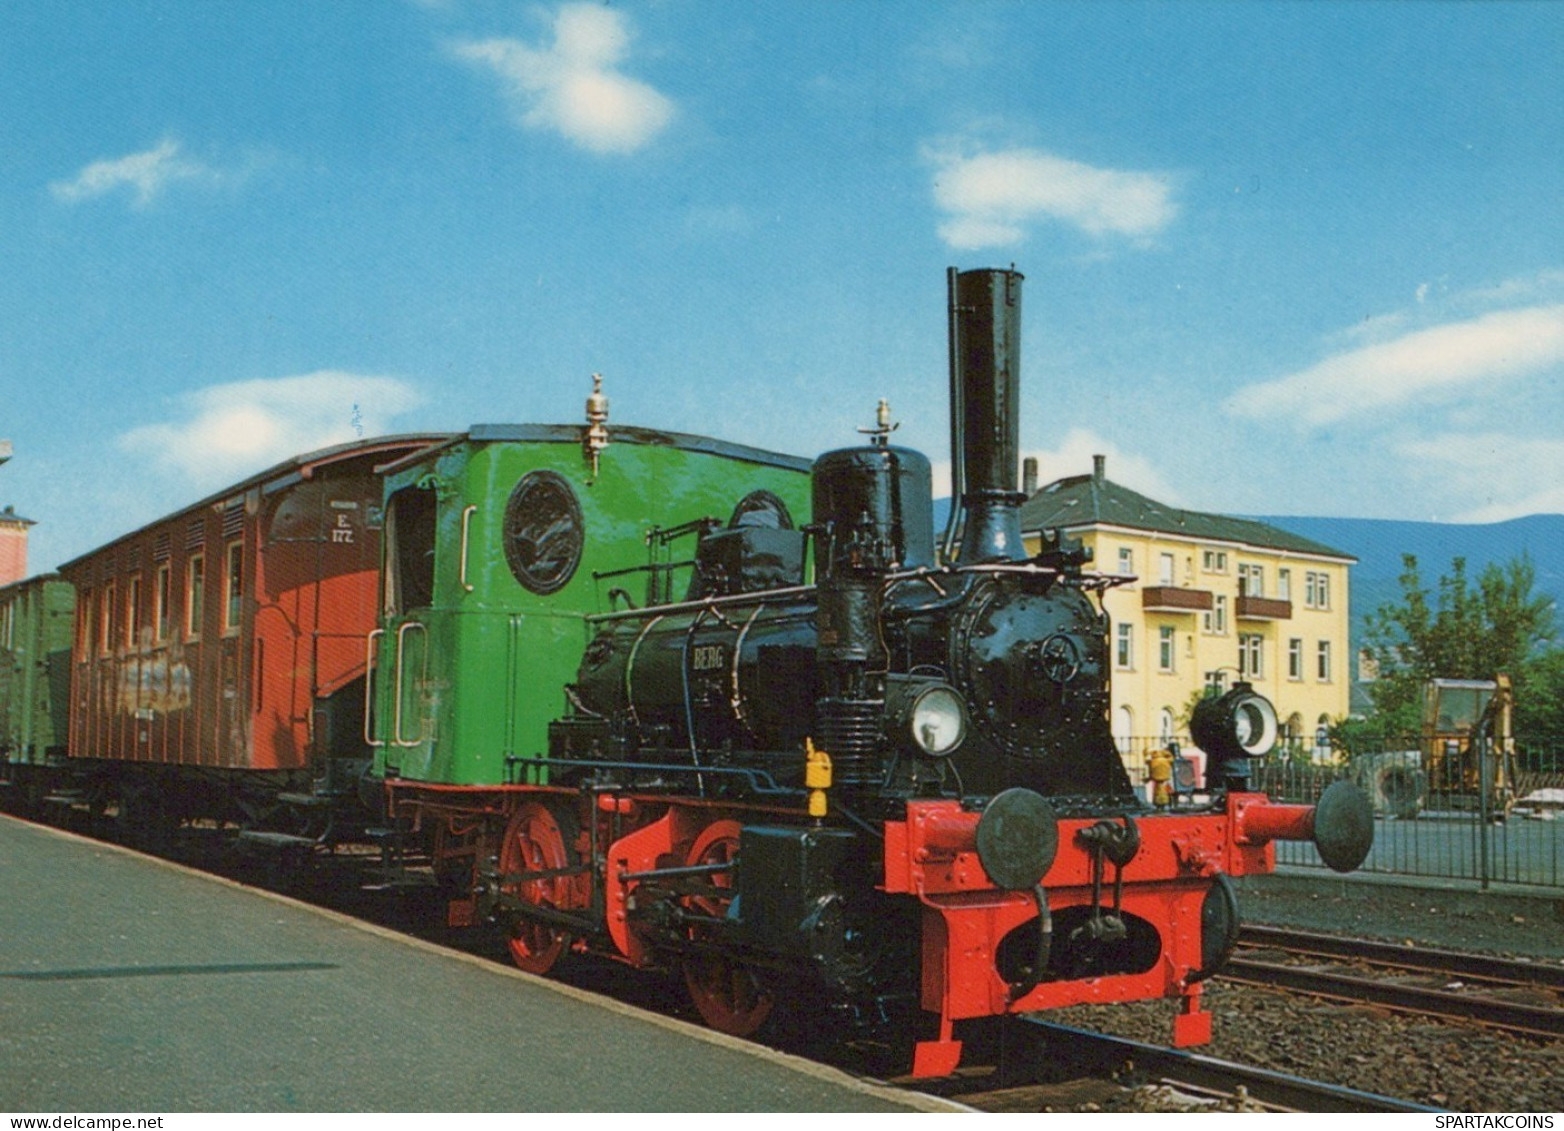 Transport FERROVIAIRE Vintage Carte Postale CPSM #PAA993.A - Trenes